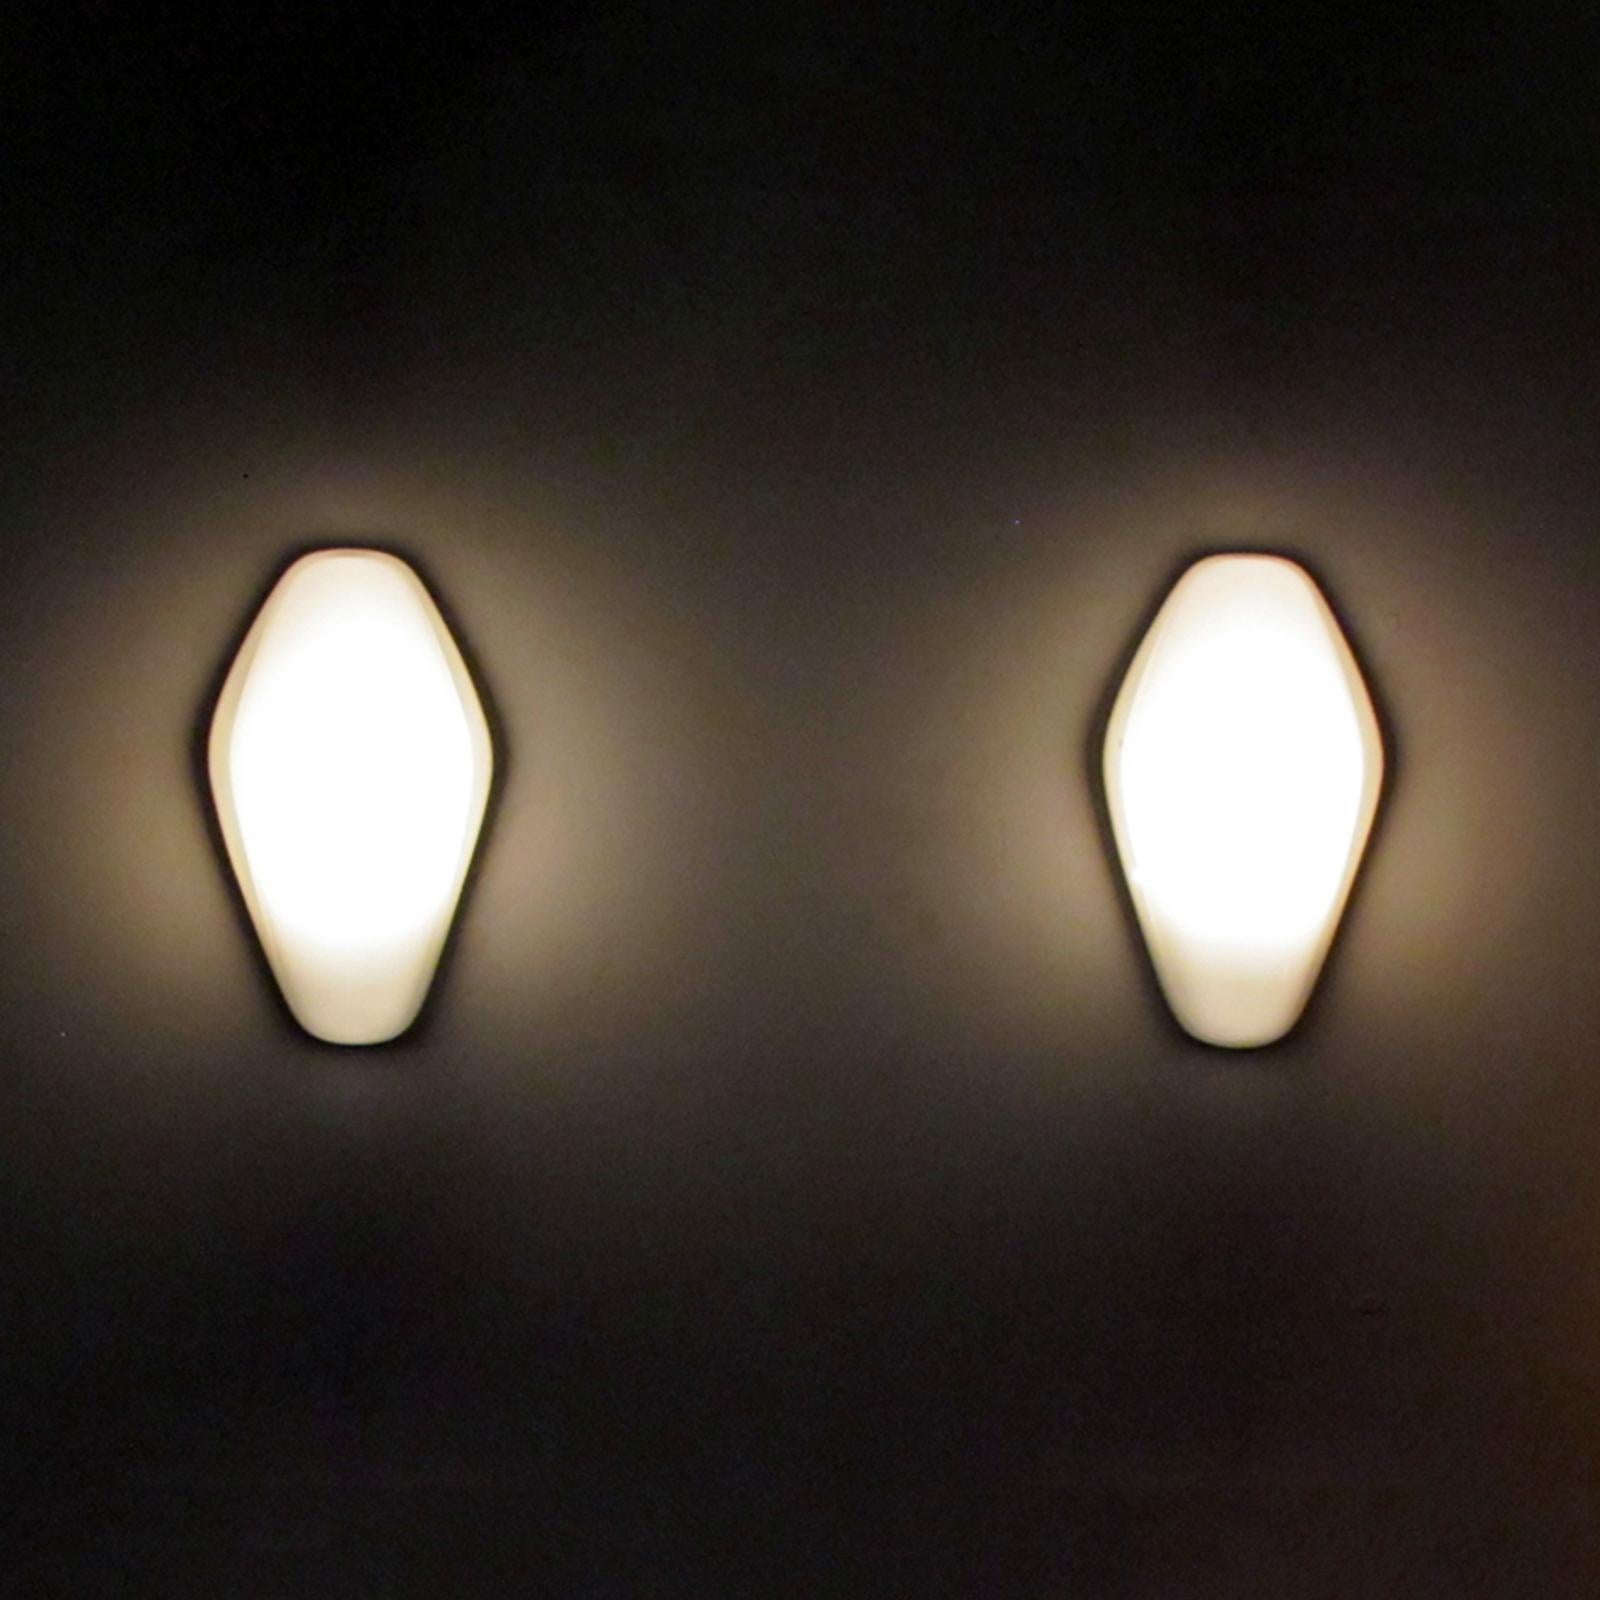 Pair of Wilhelm Wagenfeld Wall Lights No. 356 For Sale 2